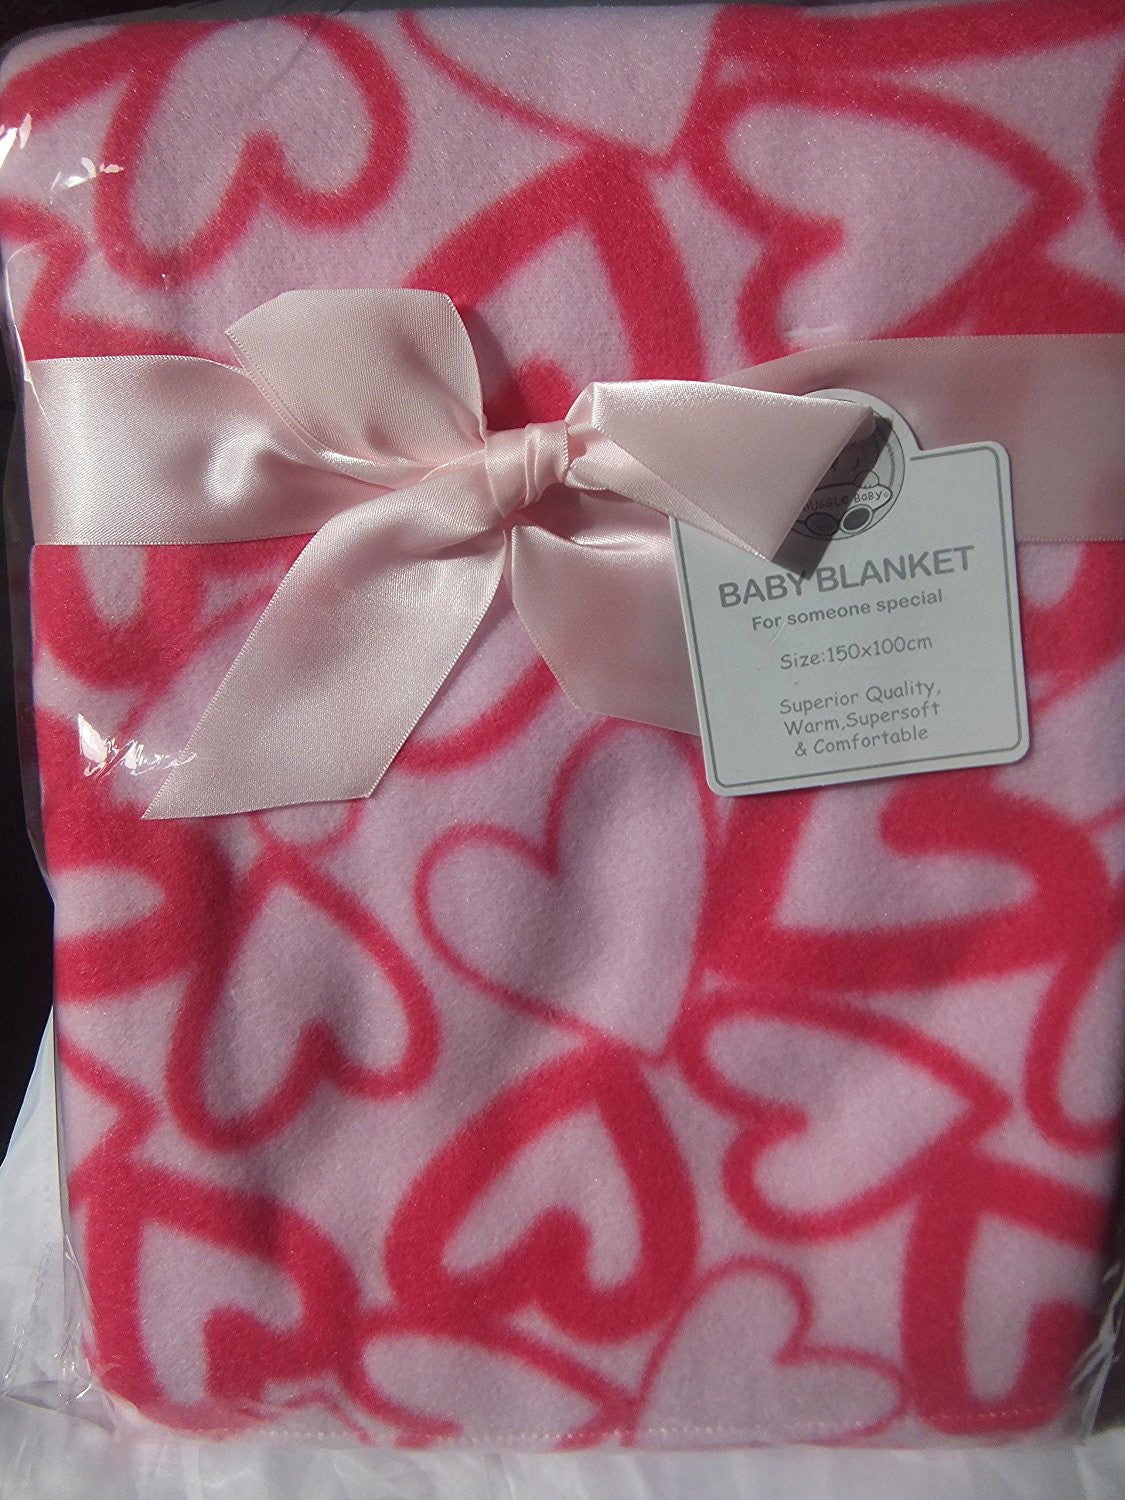 Pink Hearts Baby Cot Blanket by Nursery Time 100x150cm - hanrattycraftsgifts.co.uk